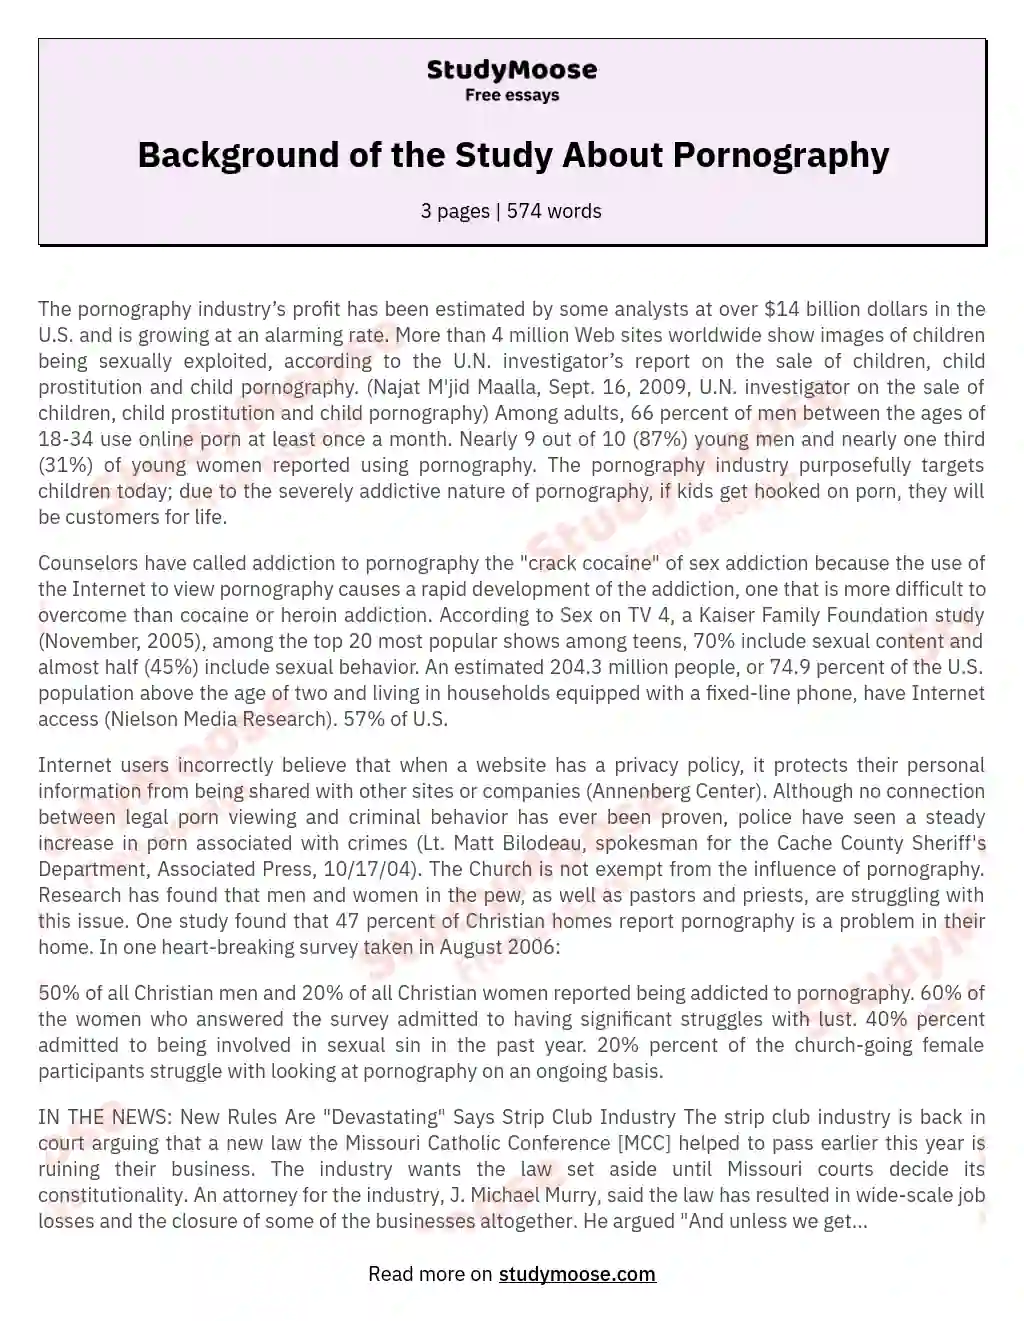 Background of the Study About Pornography